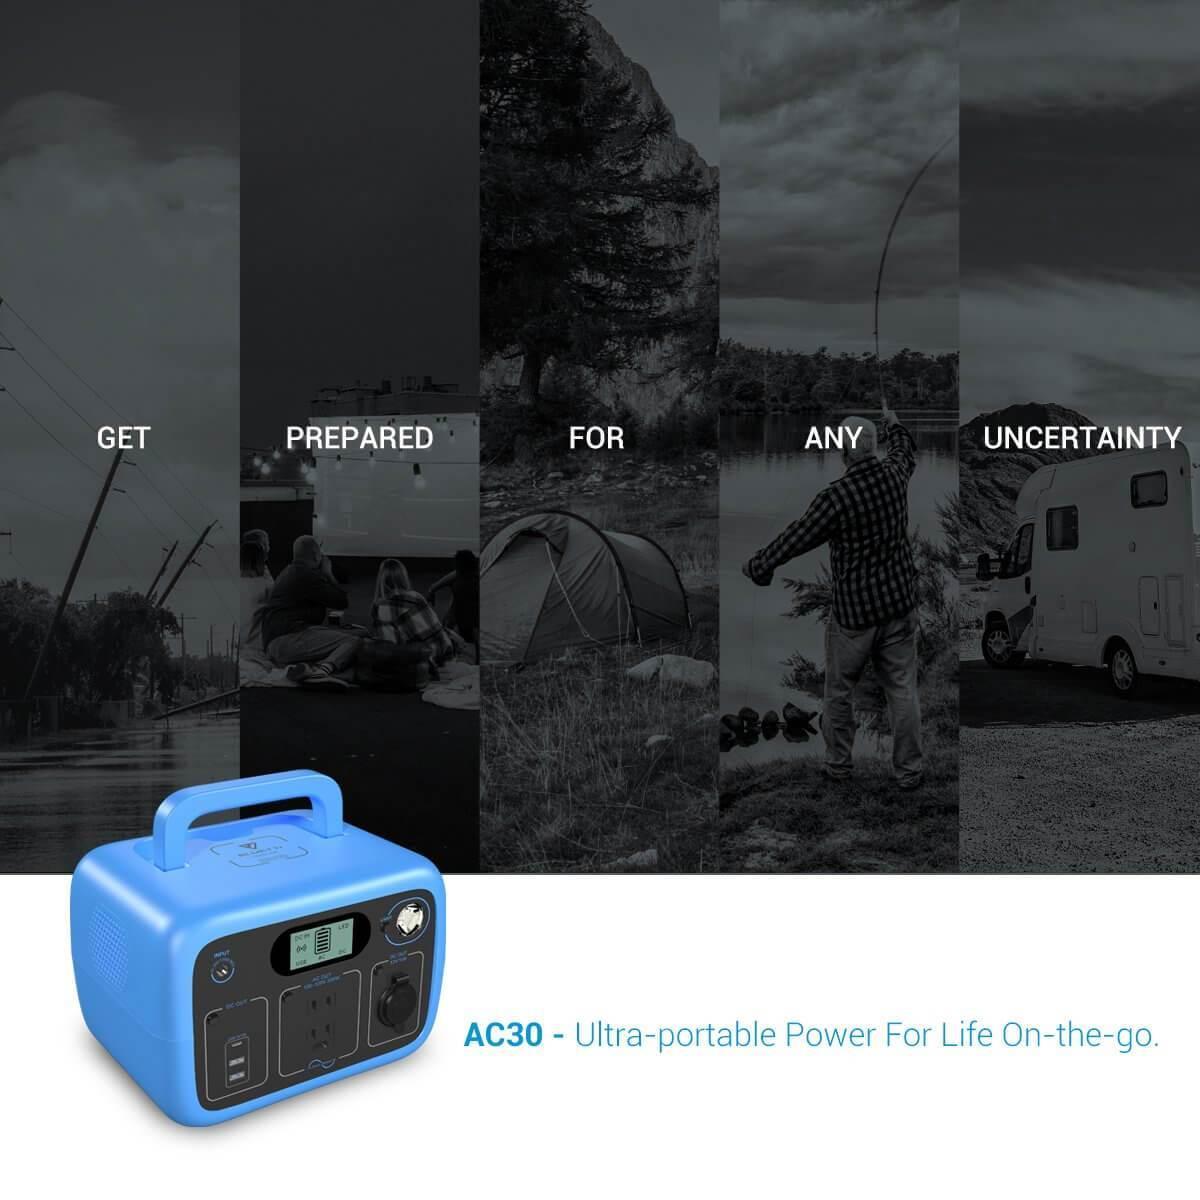 maxoak bluetti ac30 power station ultra portable power for life on-the-go